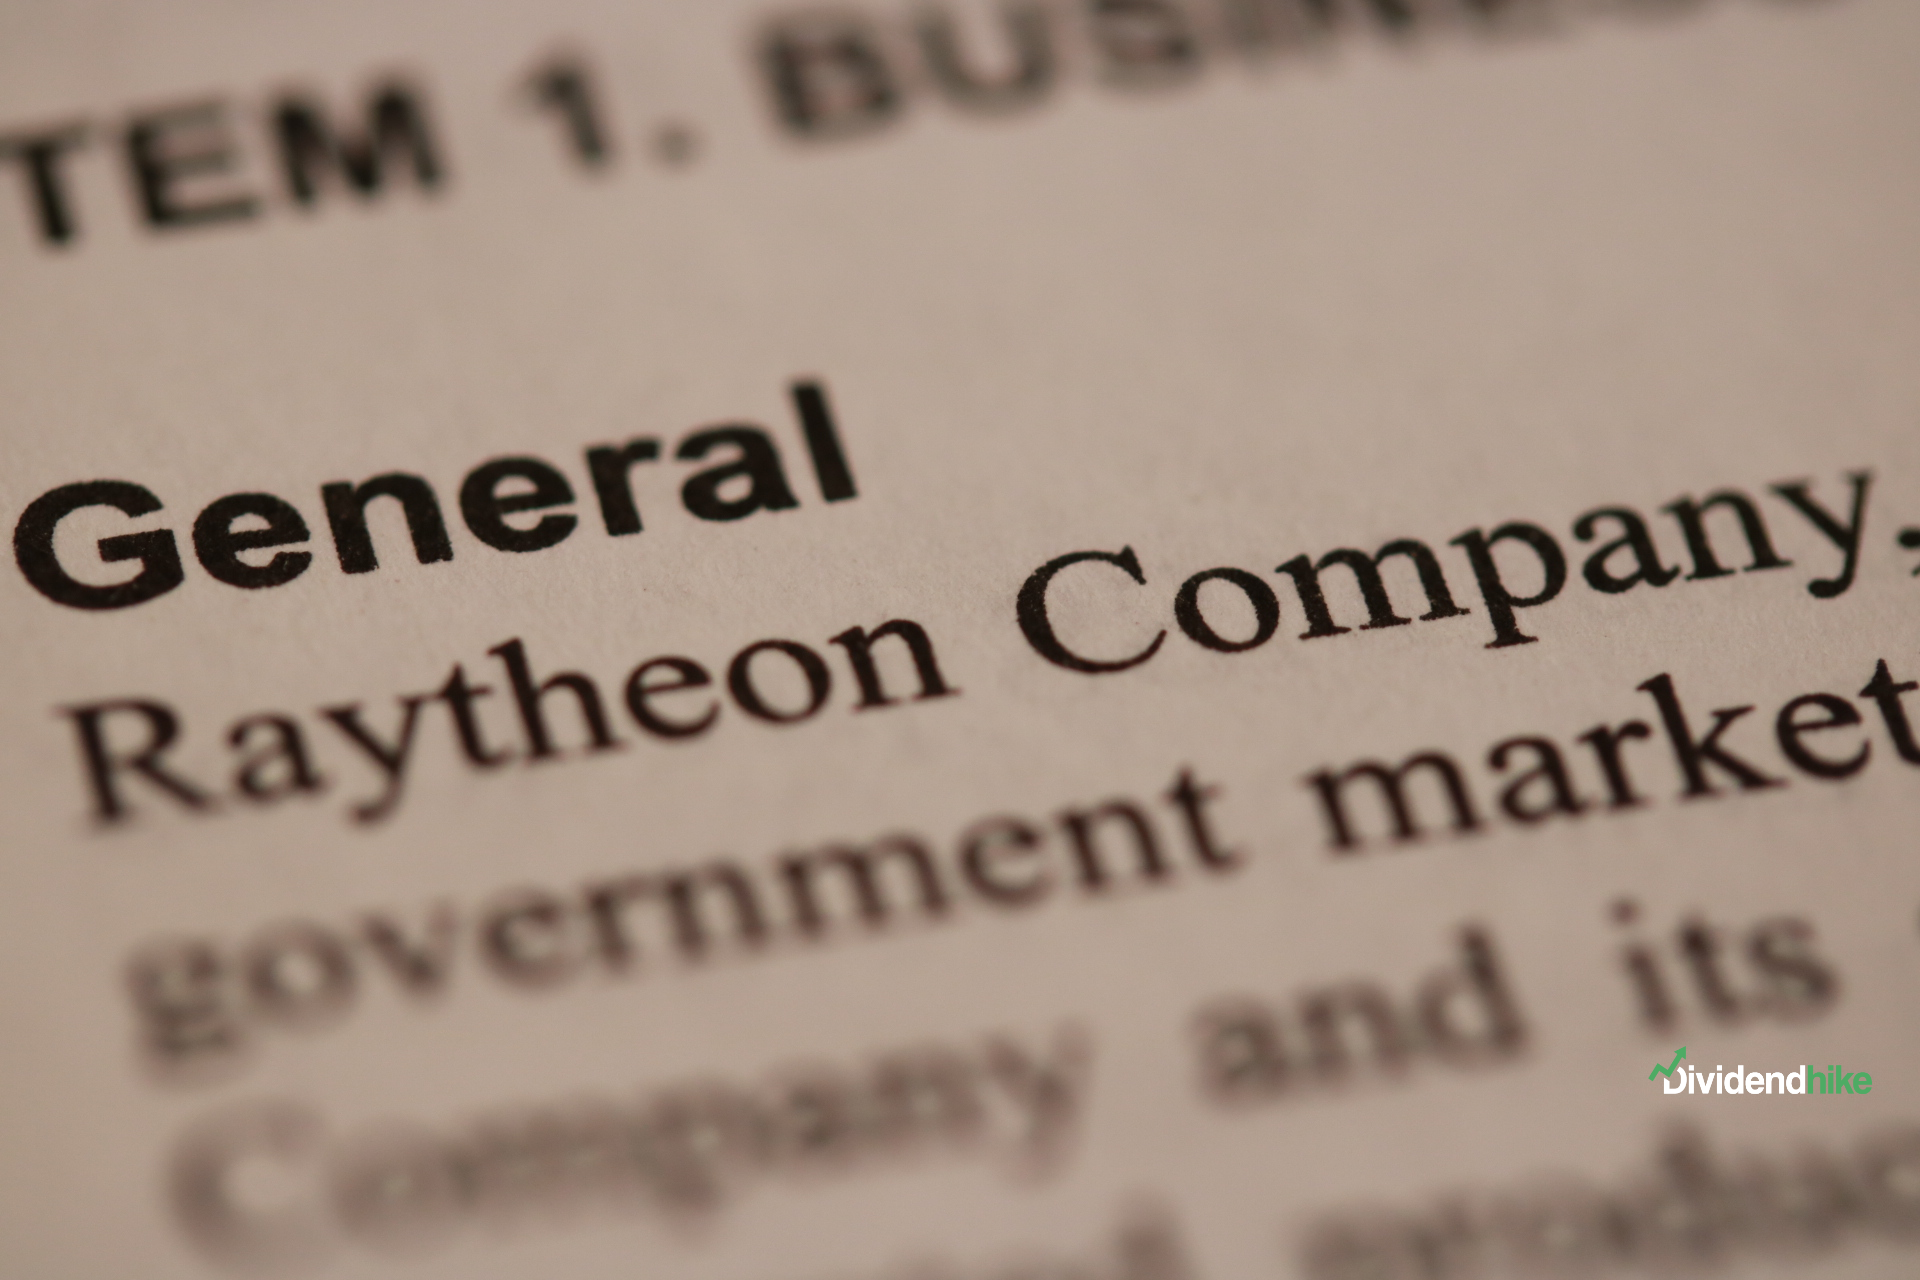 Raytheon had raised its dividend 15 consecutive years prior to the merger with United Technologies © dividendhike.com